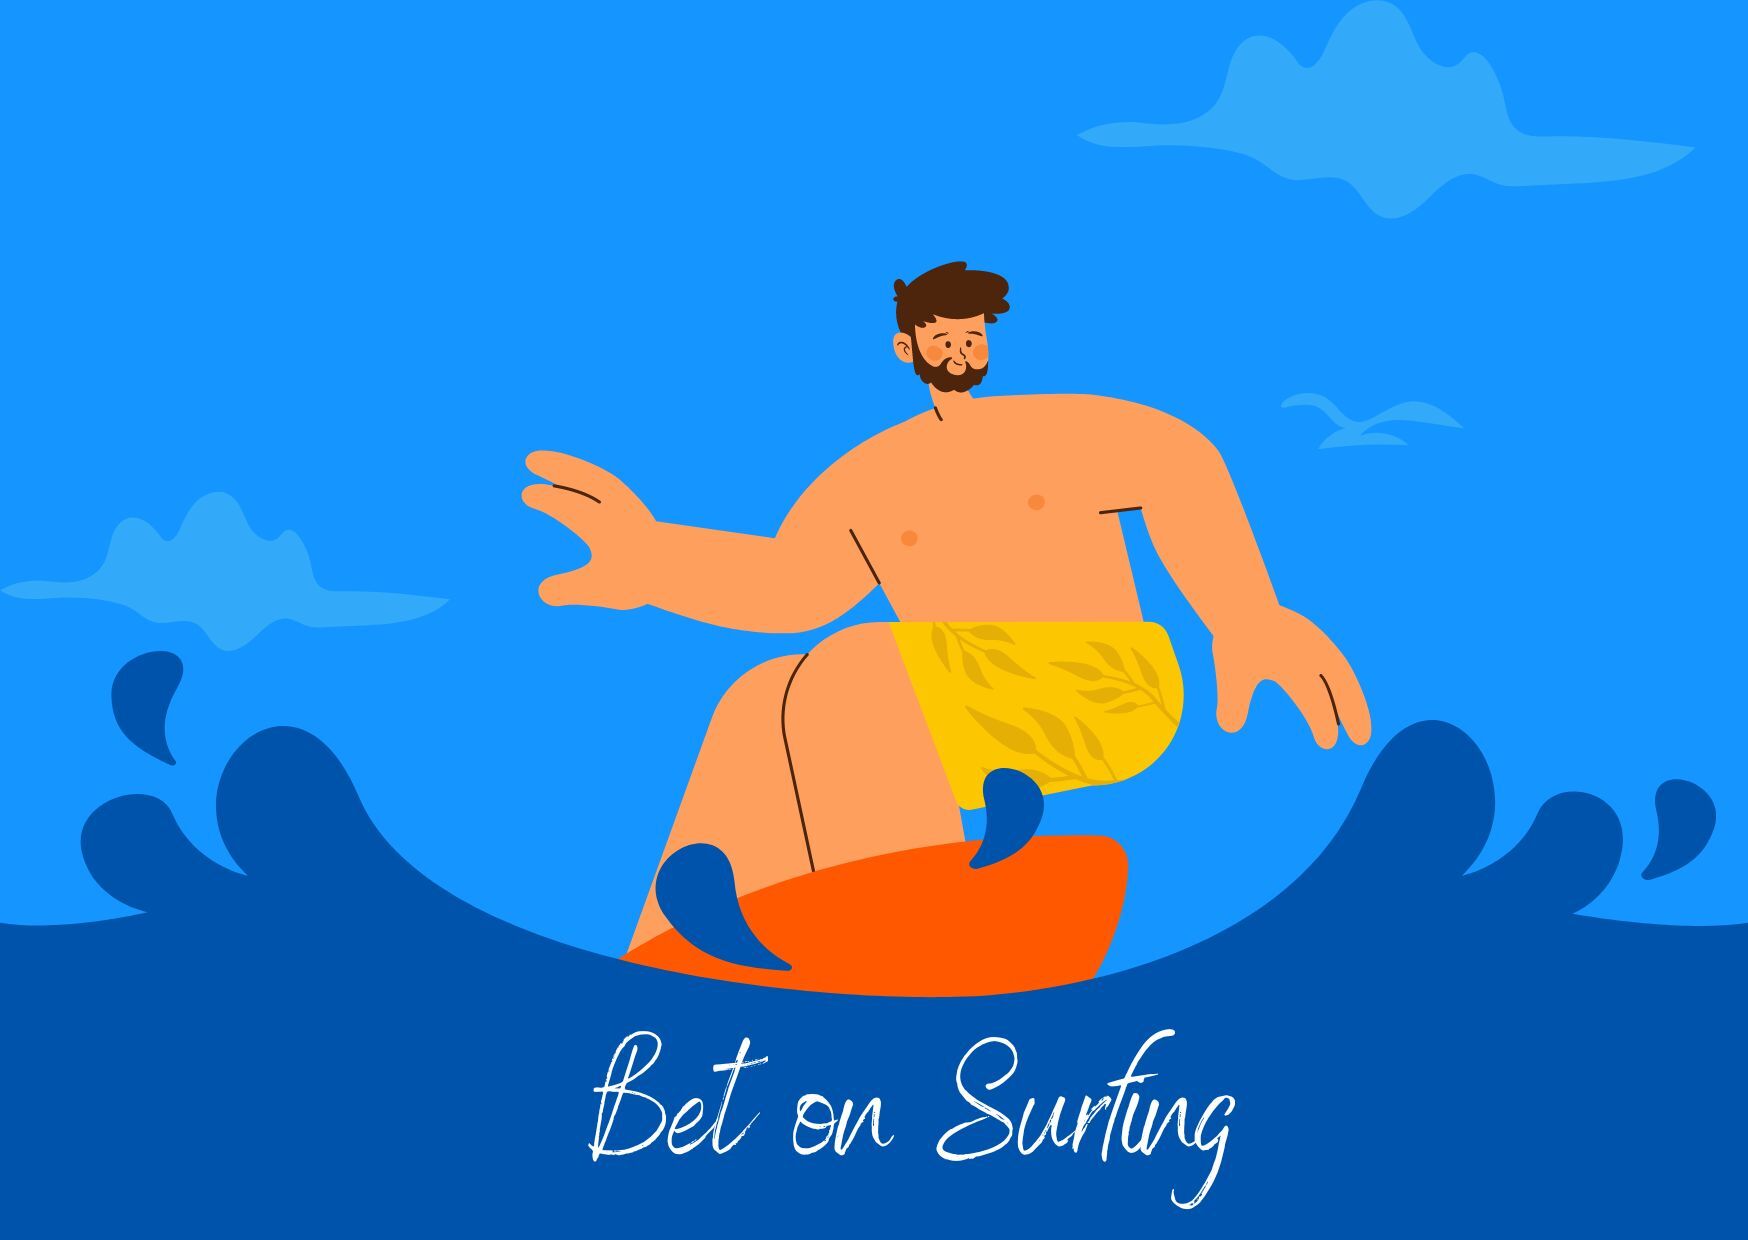 Bet on Surfing